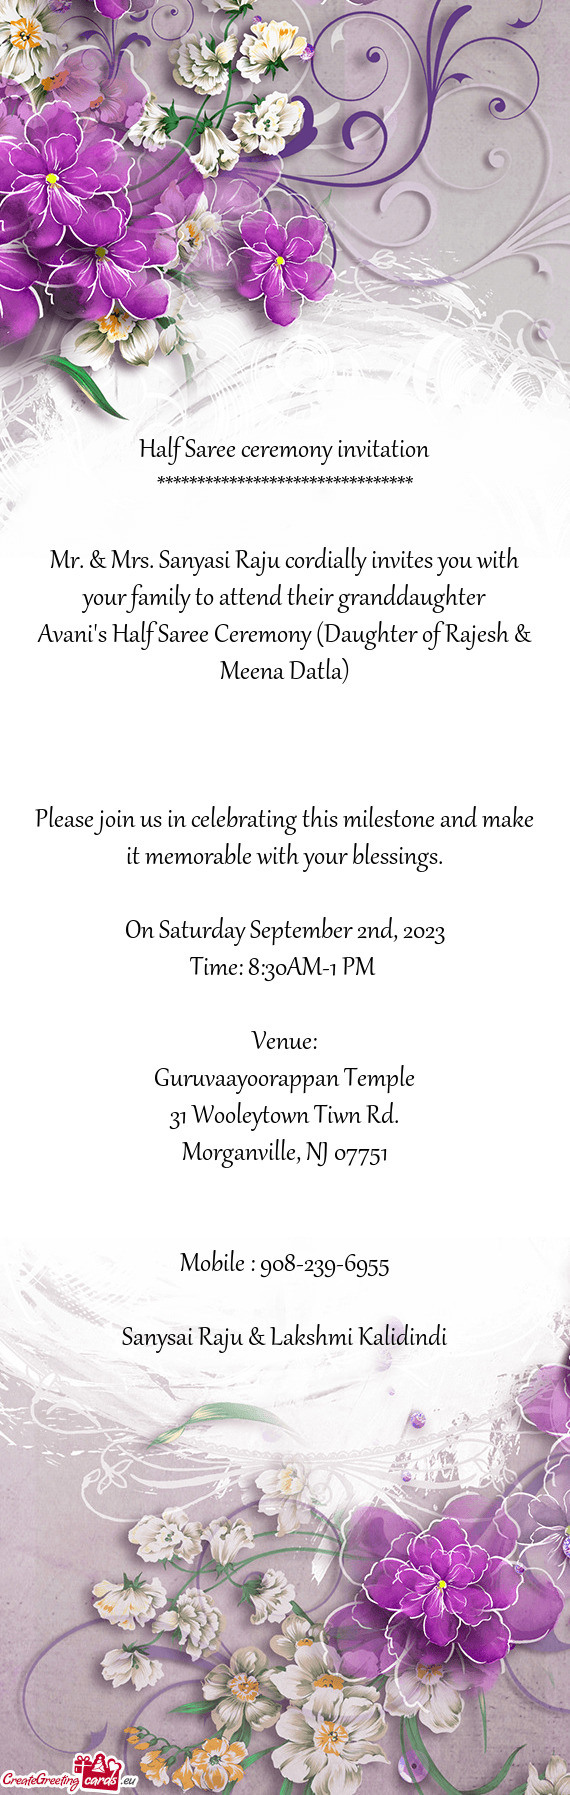 Mr. & Mrs. Sanyasi Raju cordially invites you with your family to attend their granddaughter